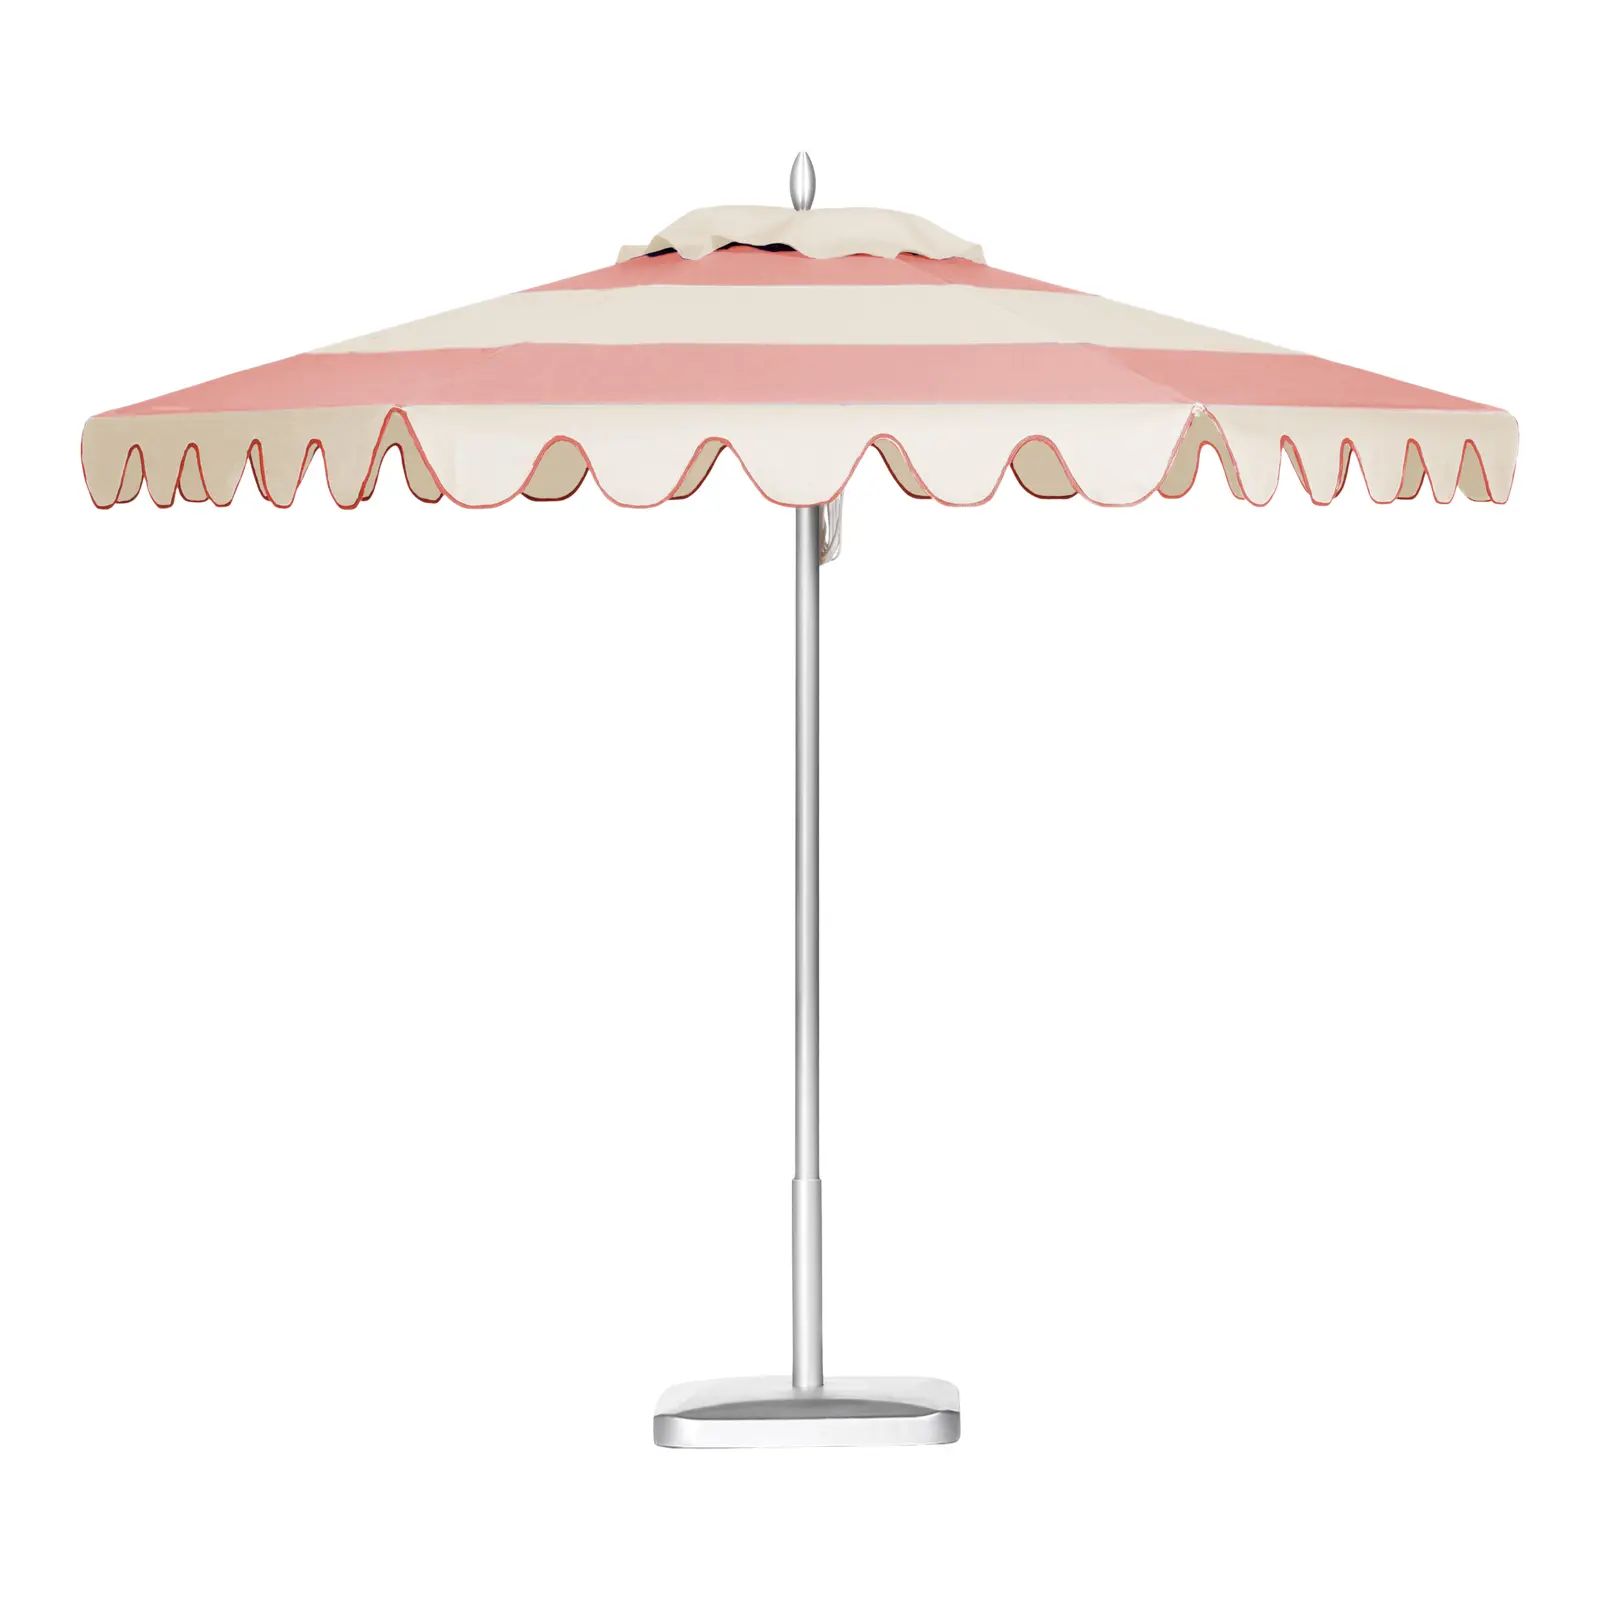 Coral Sands 9' Patio Umbrella, Pink and White | Chairish